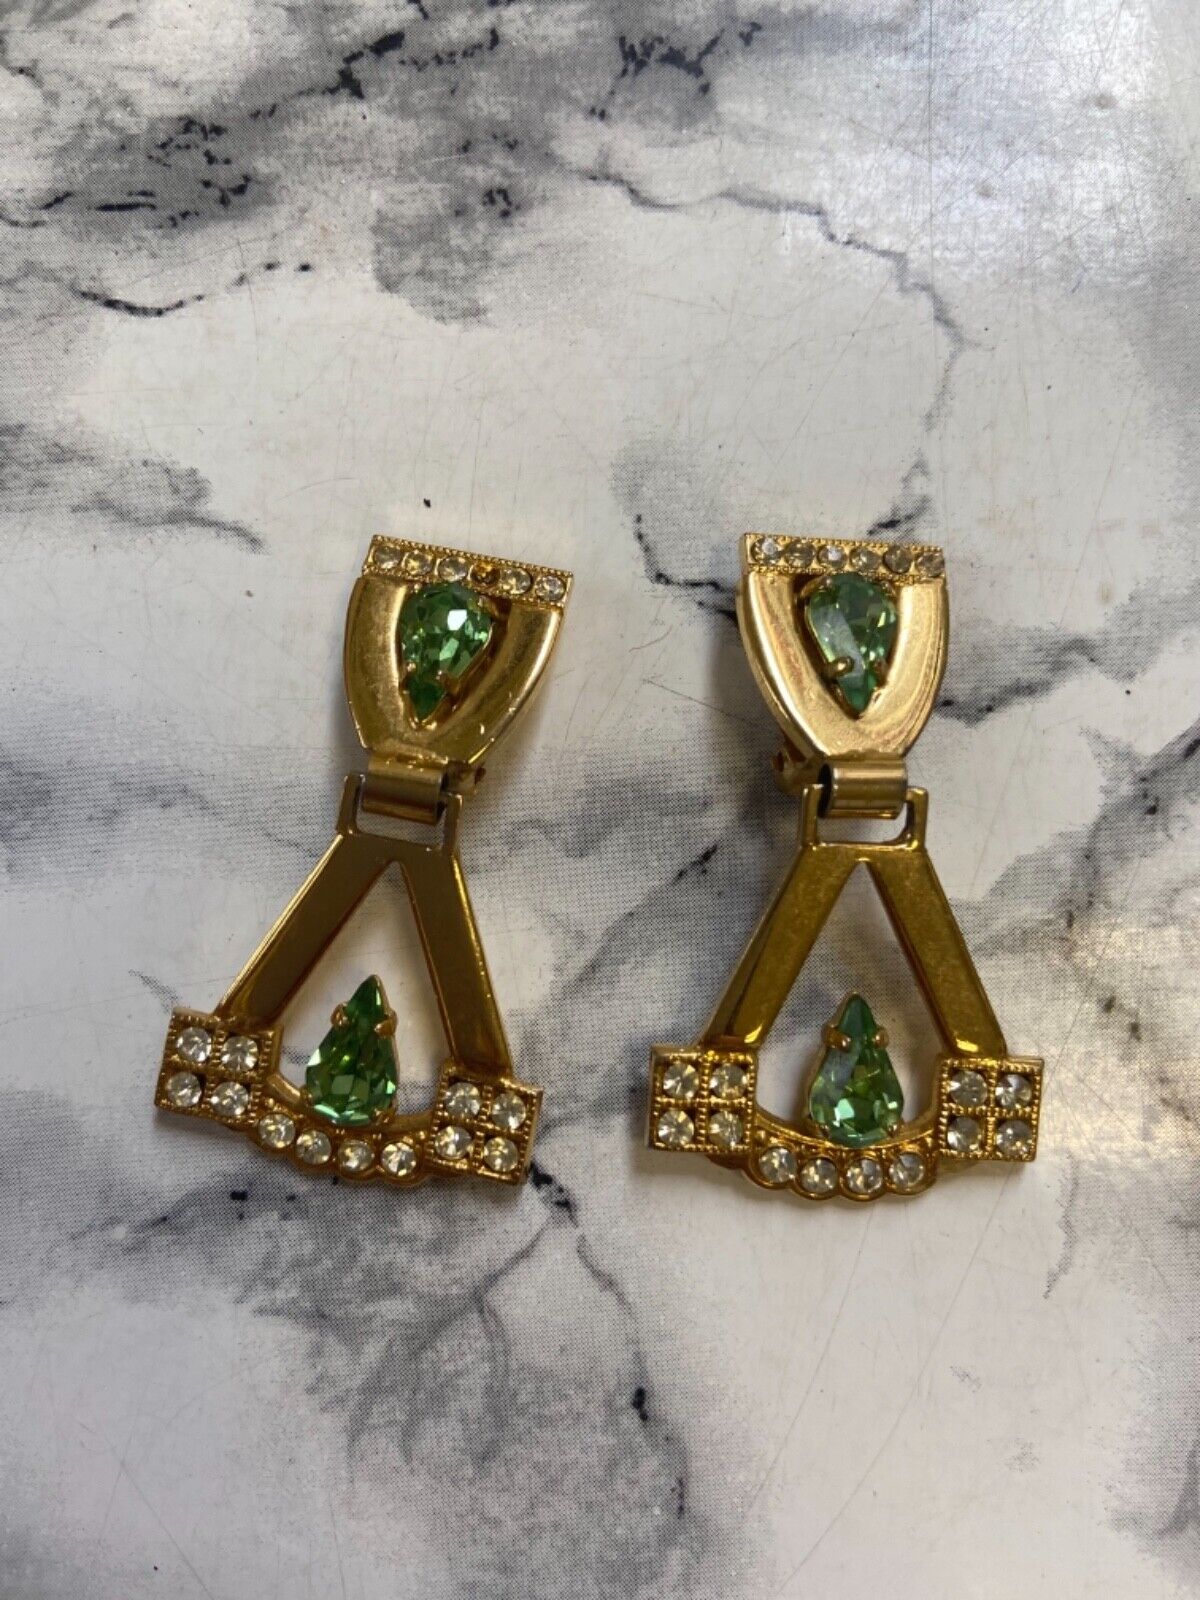 Vintage earrings - golden and green